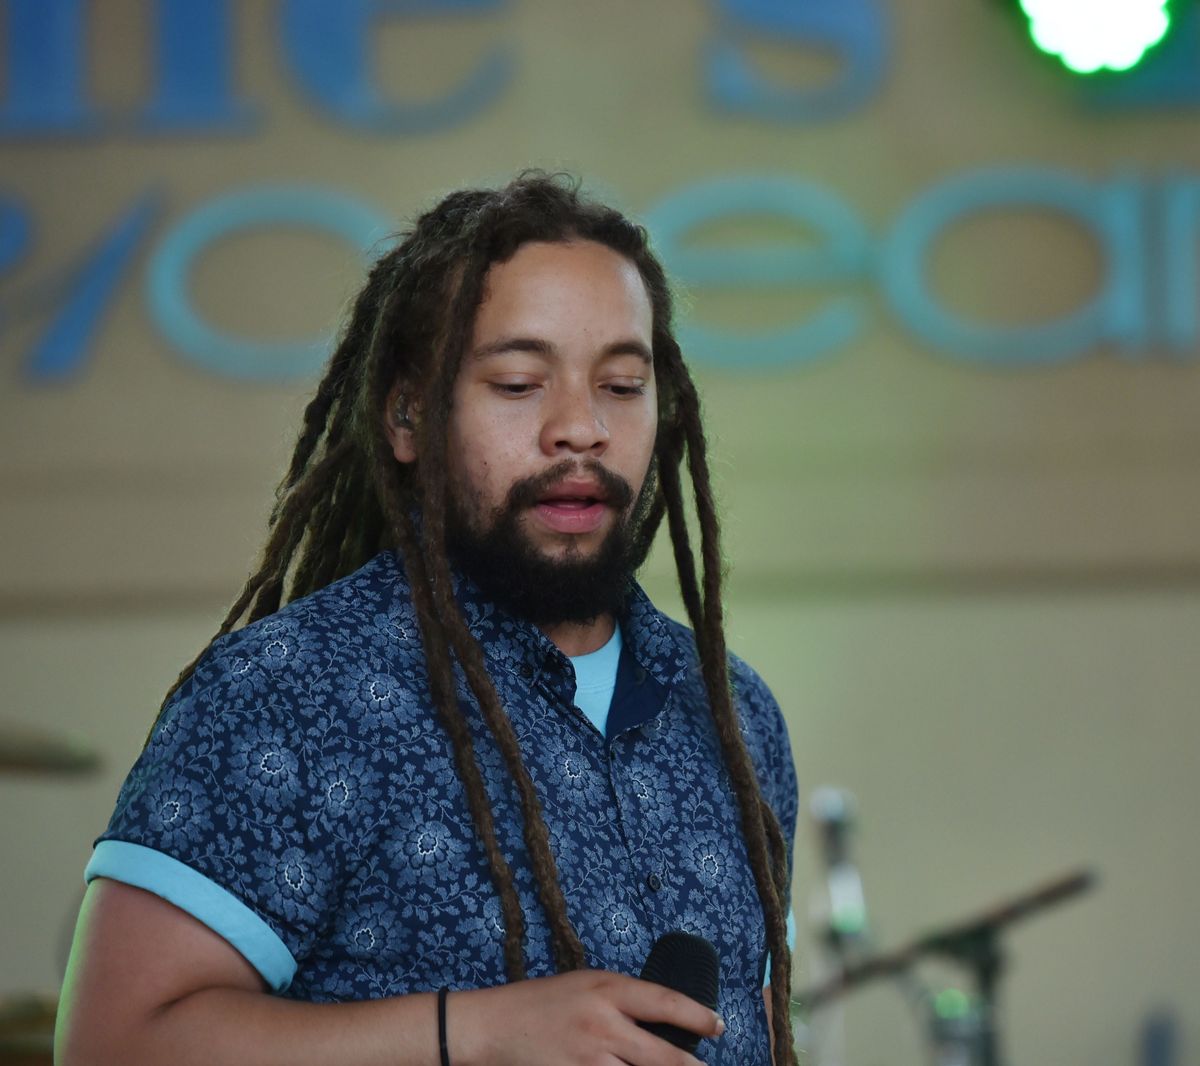 JO MERSA MARLEY brings the reggae to the oceanfront at Neptunes Park on 31st street in Virginia Beach, Virginia on 6 August 2019. JO MERSA MARLEY given name   Joseph ''Jo Mersa'' Marley (born March 12, 1991 in Kingston, Jamaica) is a Jamaican American regg